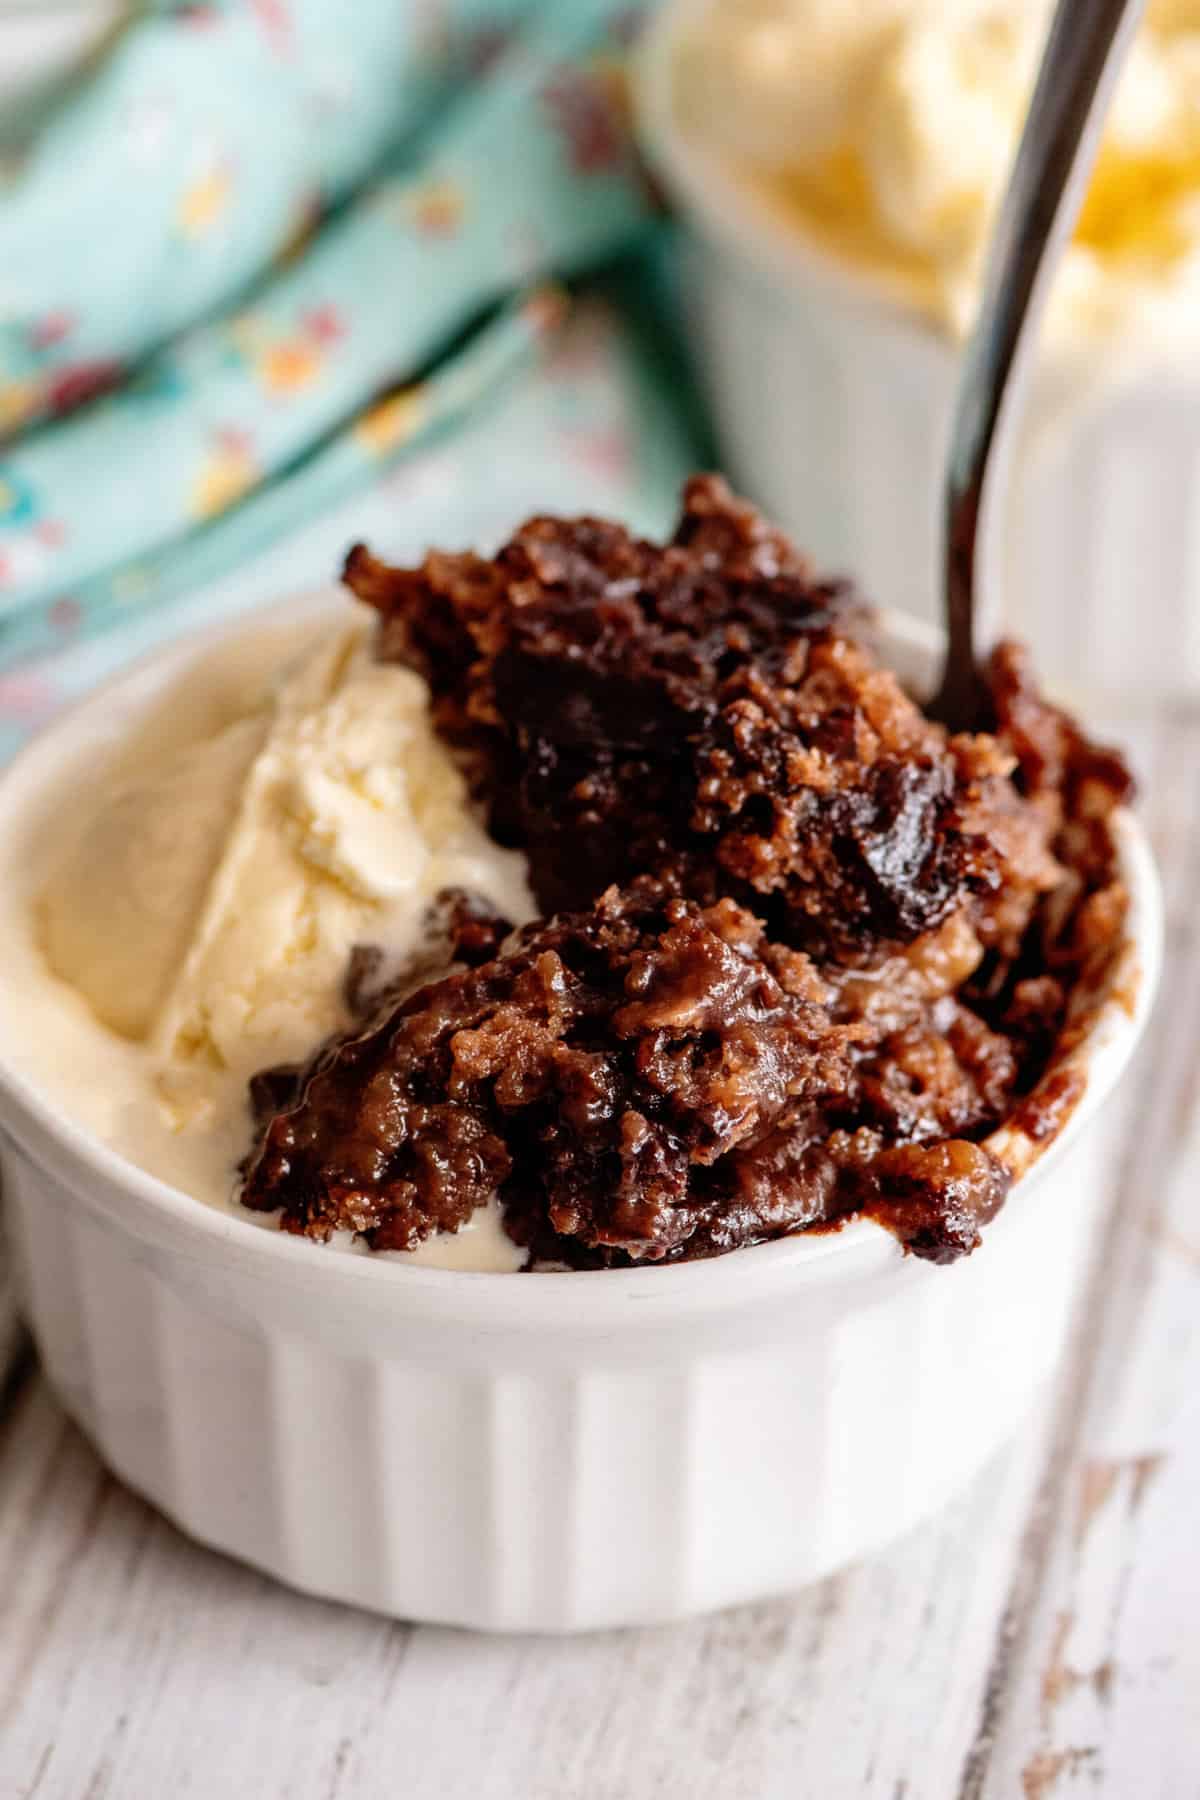 Bowl of chocolate cobbler with ice cream.